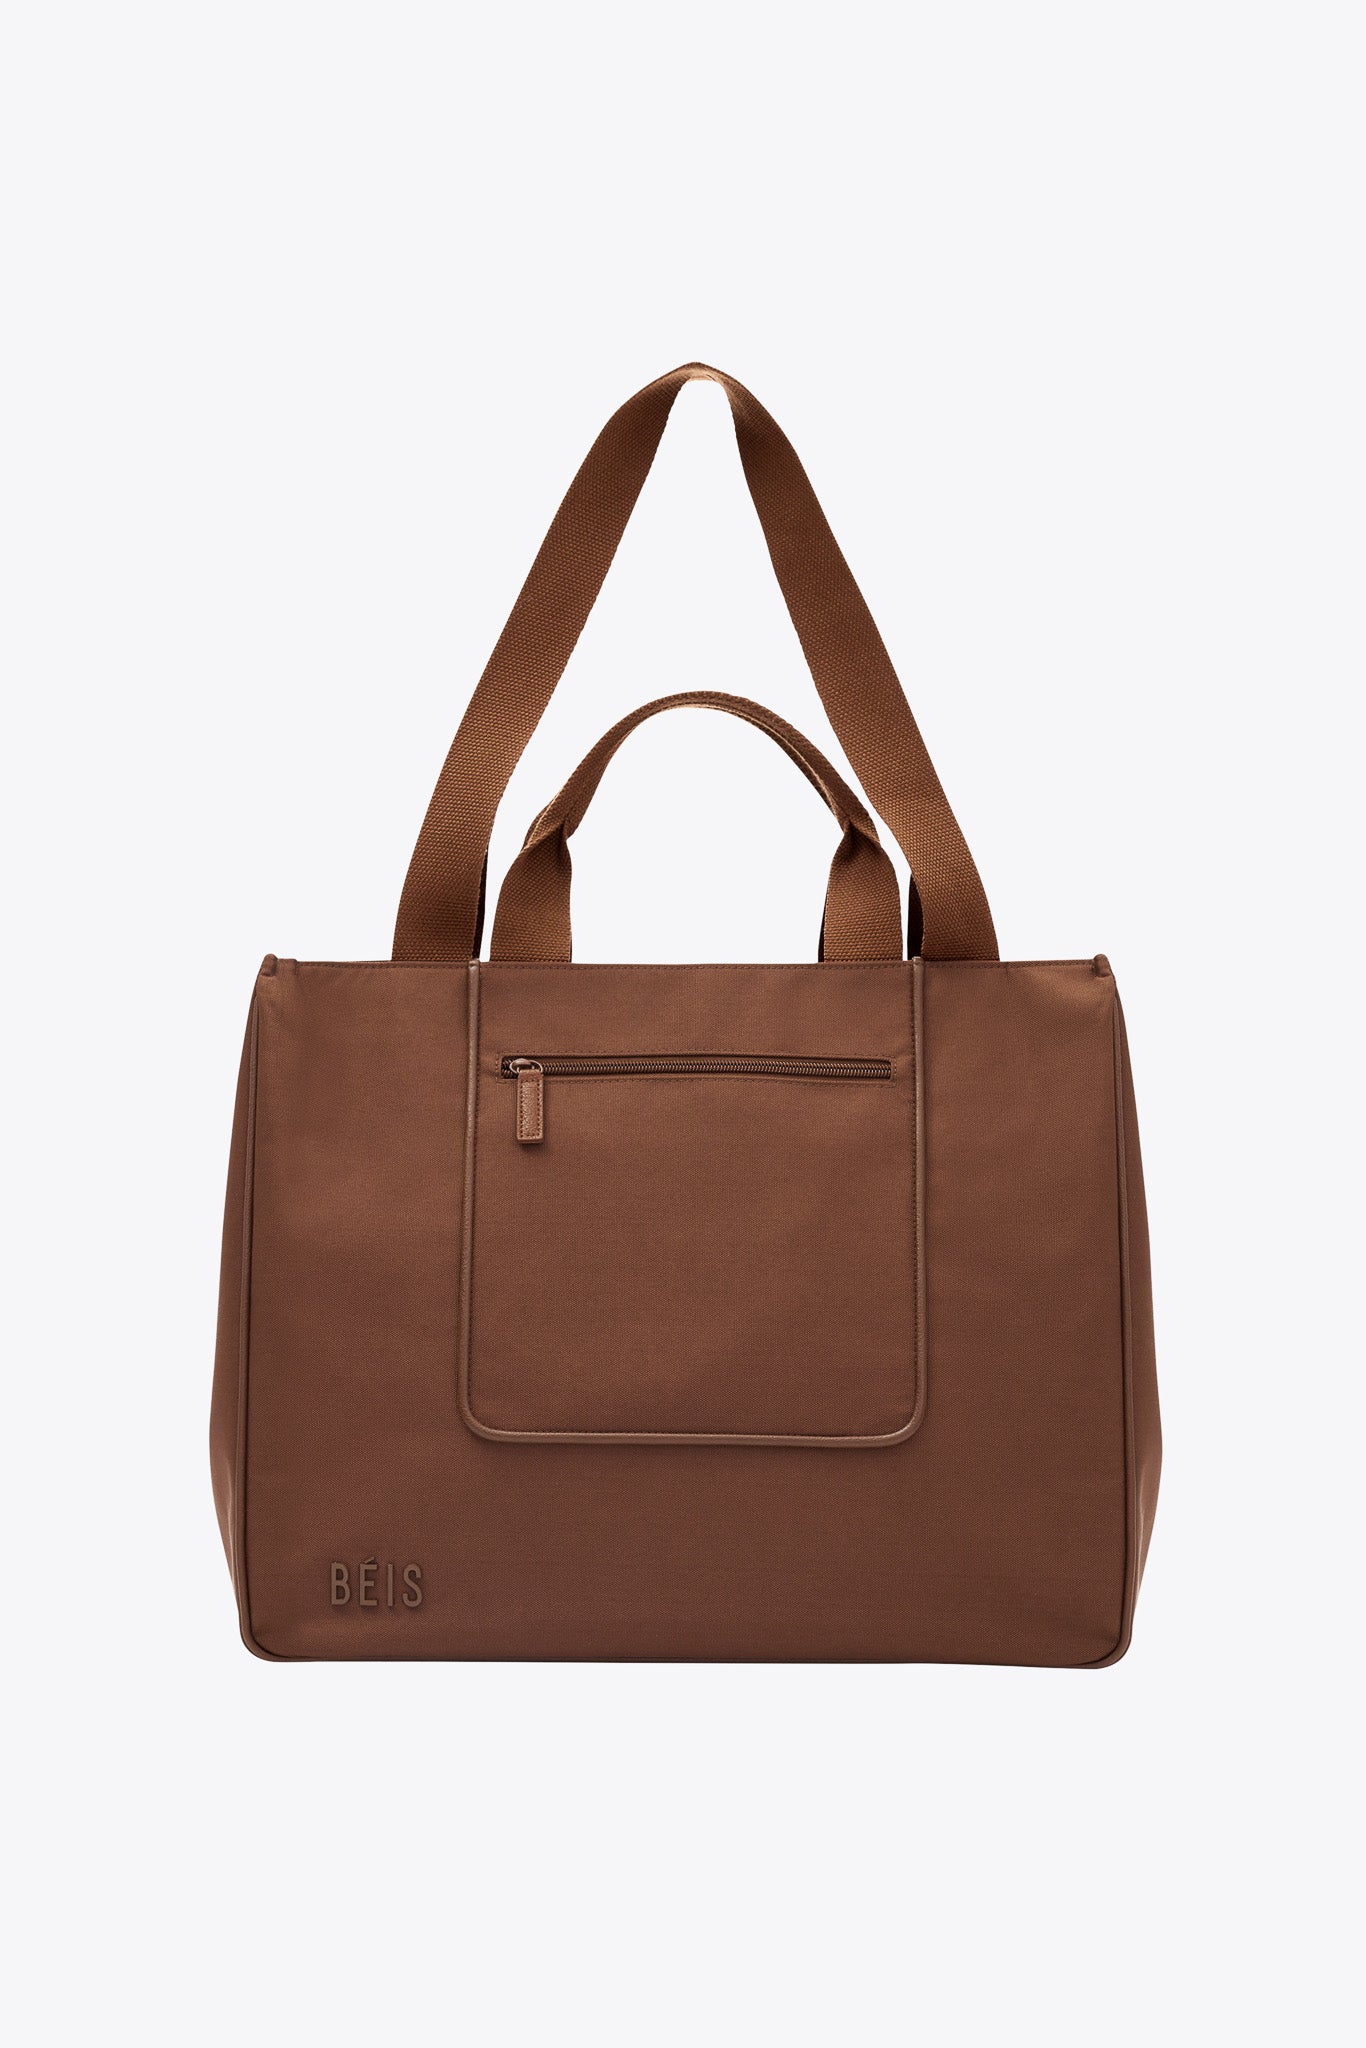 The East To West Tote in Maple